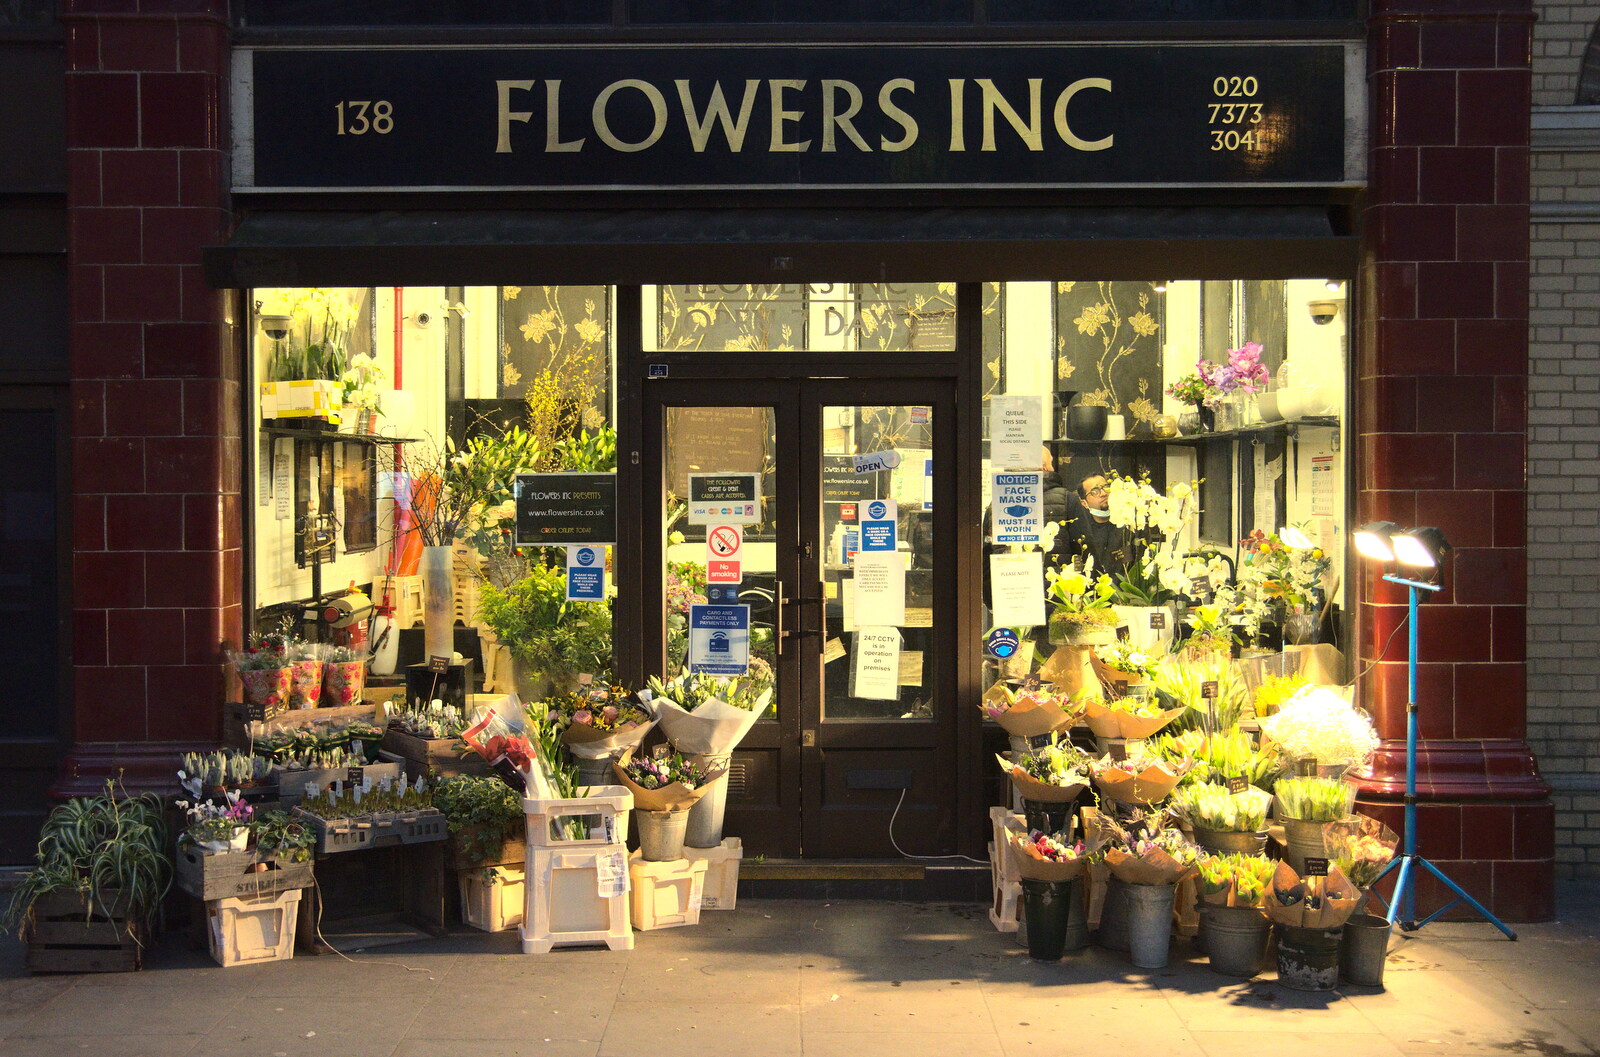 A florist called Flowers Inc from A Trip to the Natural History Museum, Kensington, London - 15th January 2022